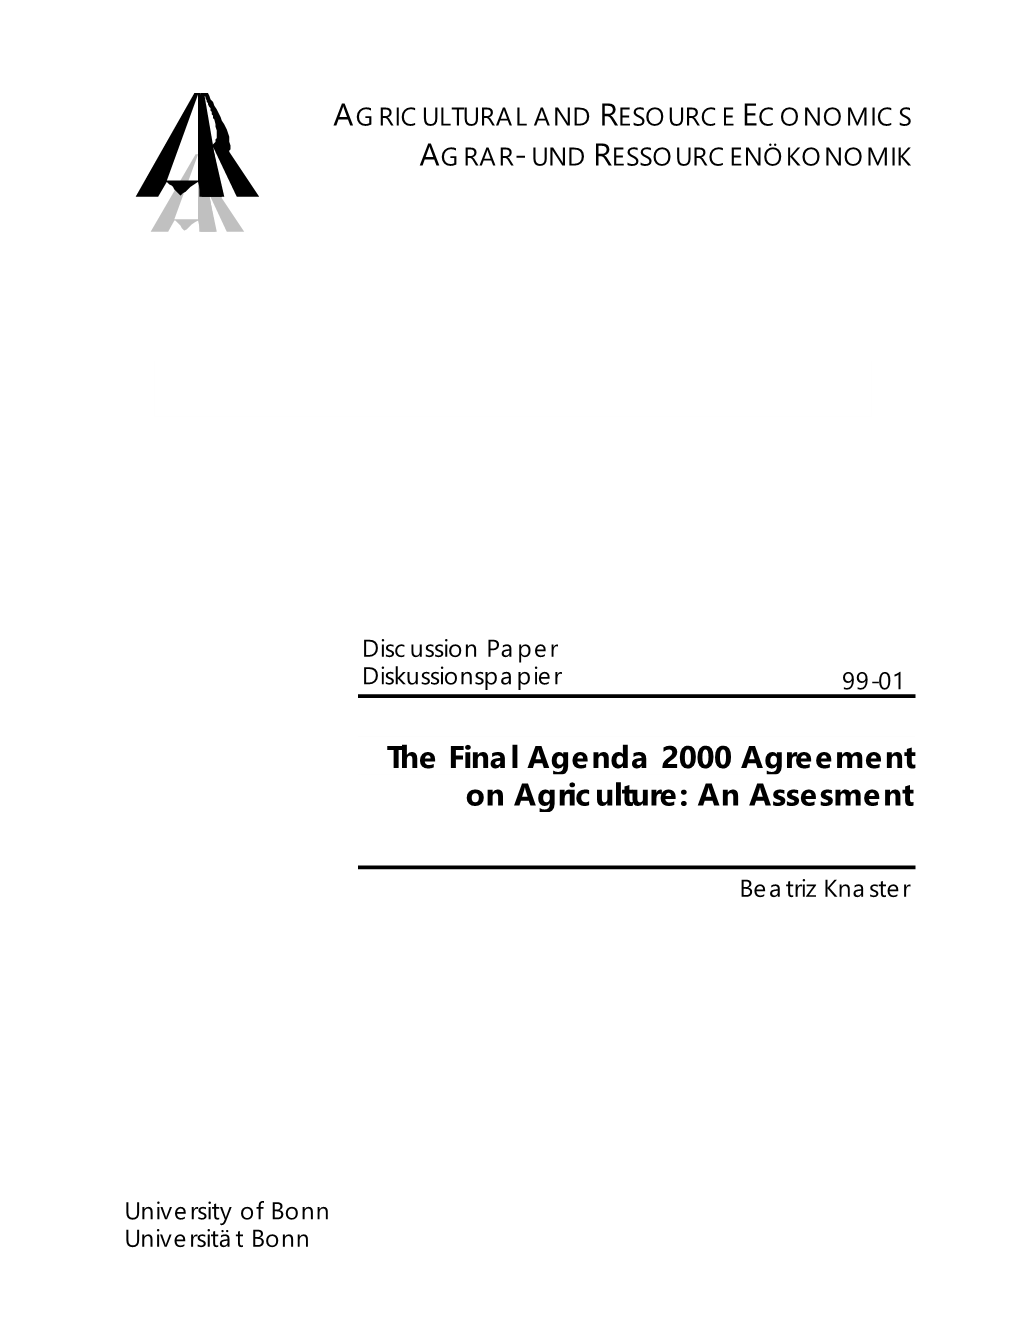 The Final Agenda 2000 Agreement on Agriculture: an Assesment